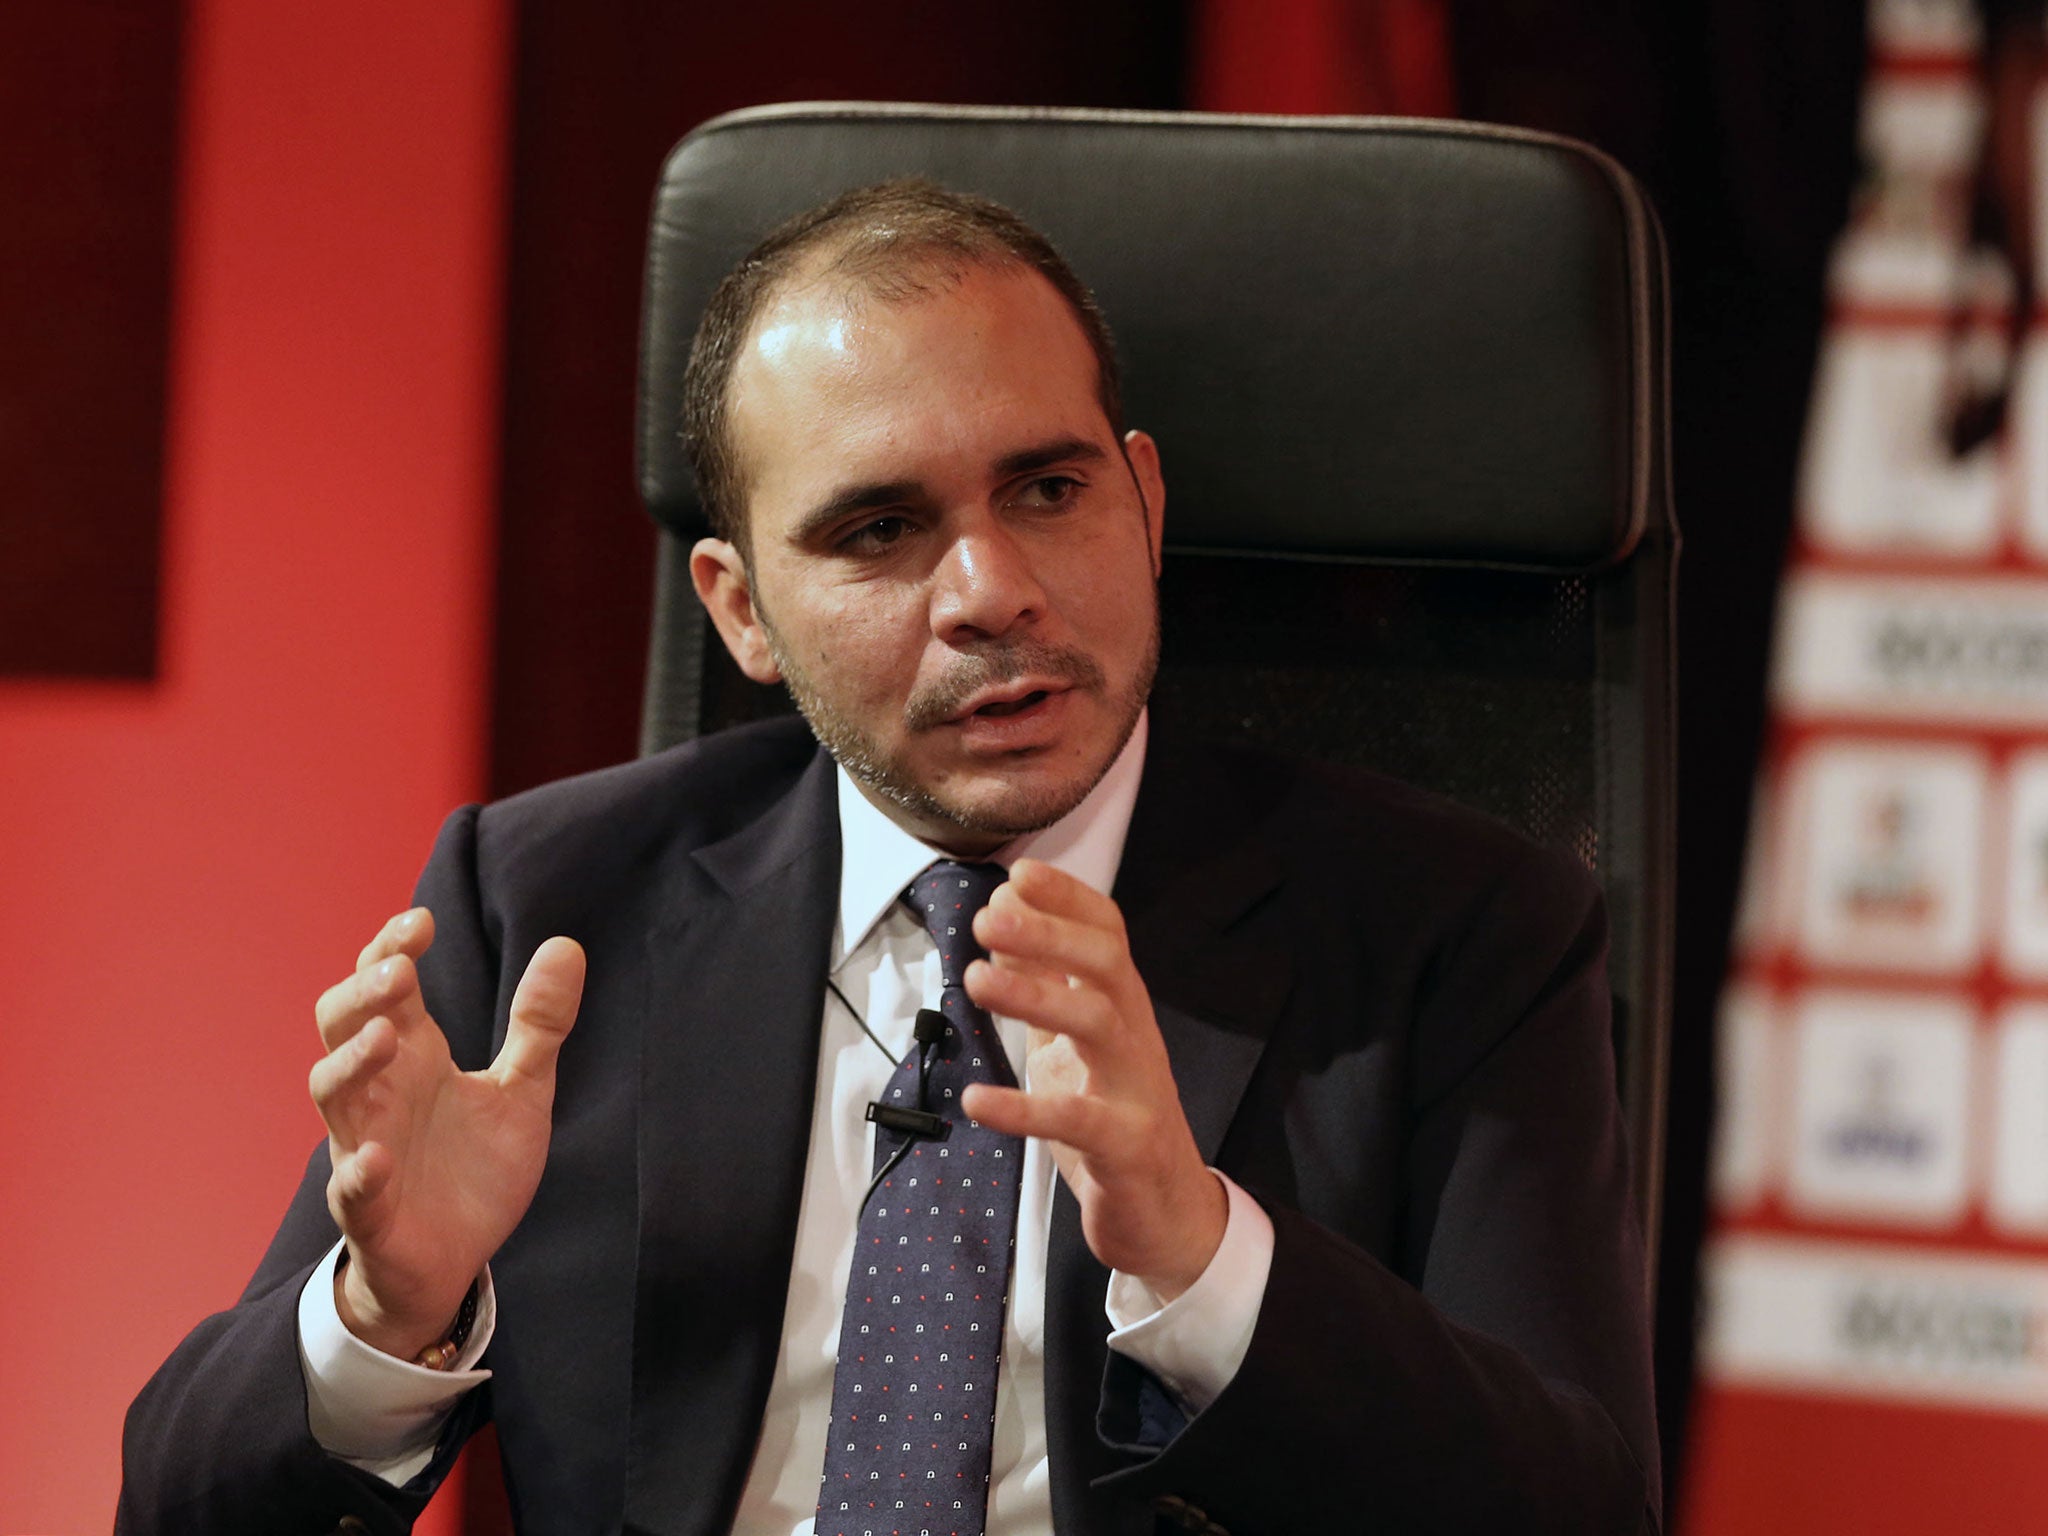 Prince Ali Bin Al-Hussein has said it was right for Blatter to resign